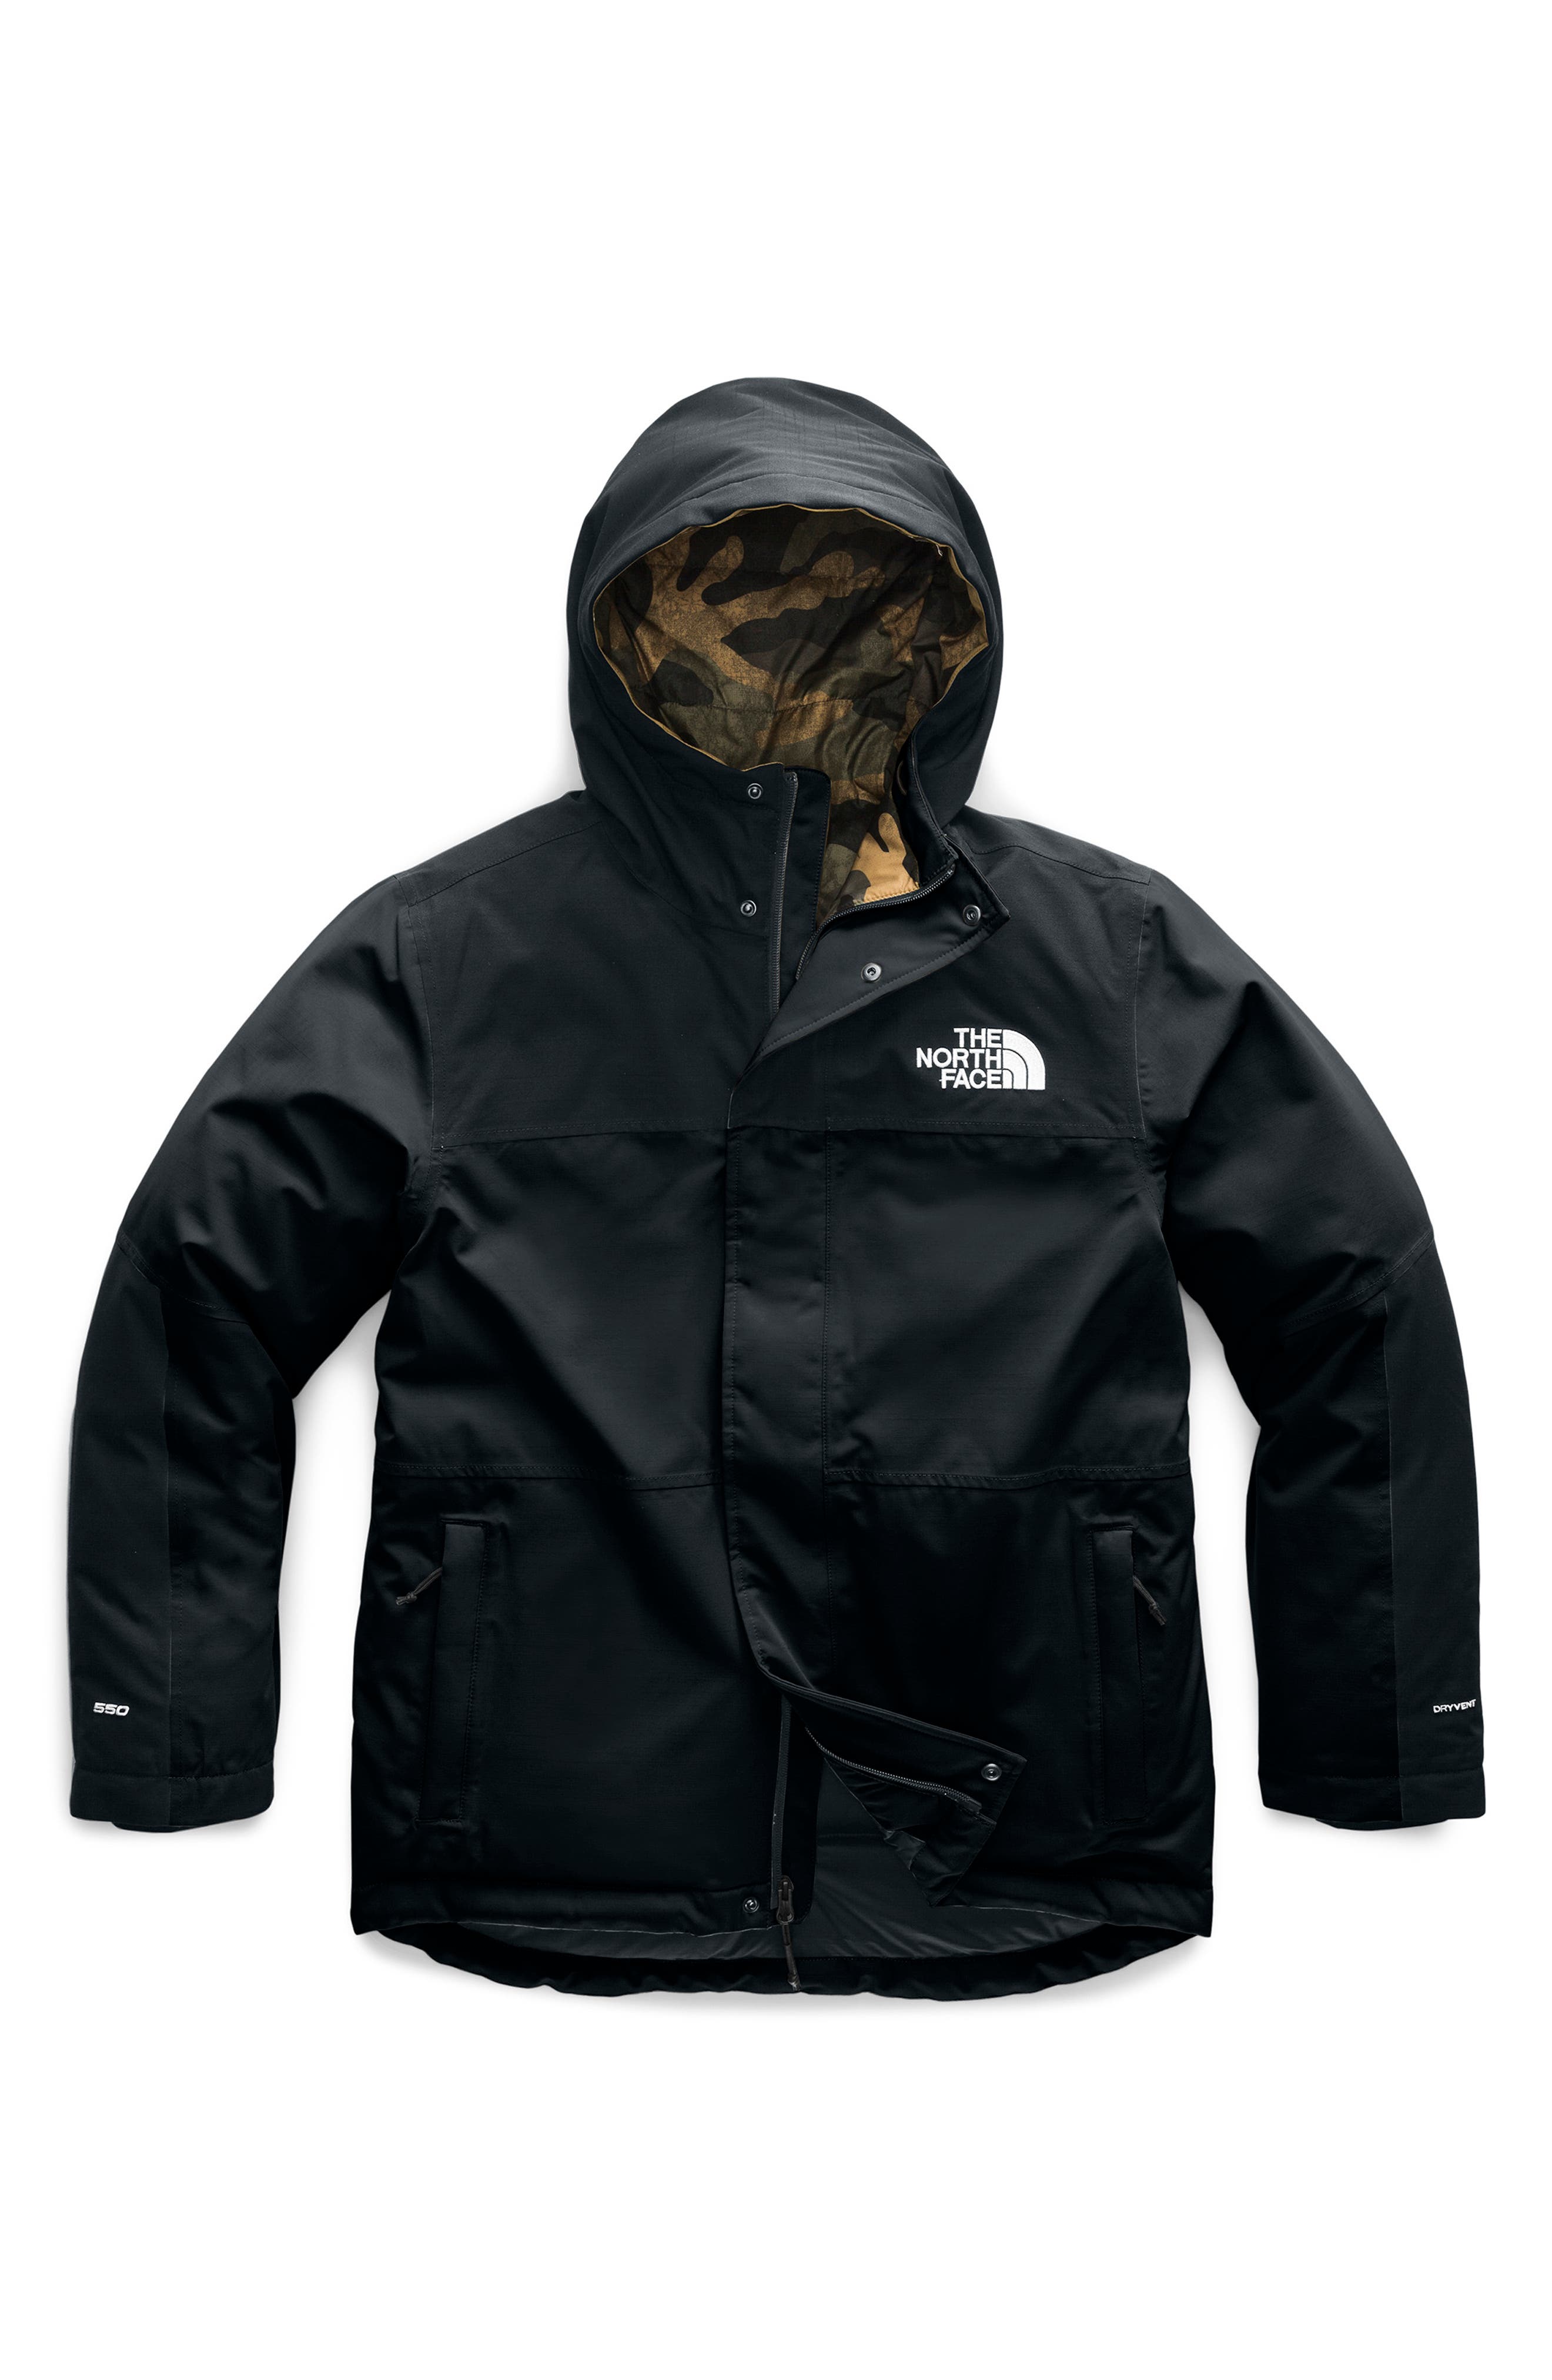 north face 500 fill down